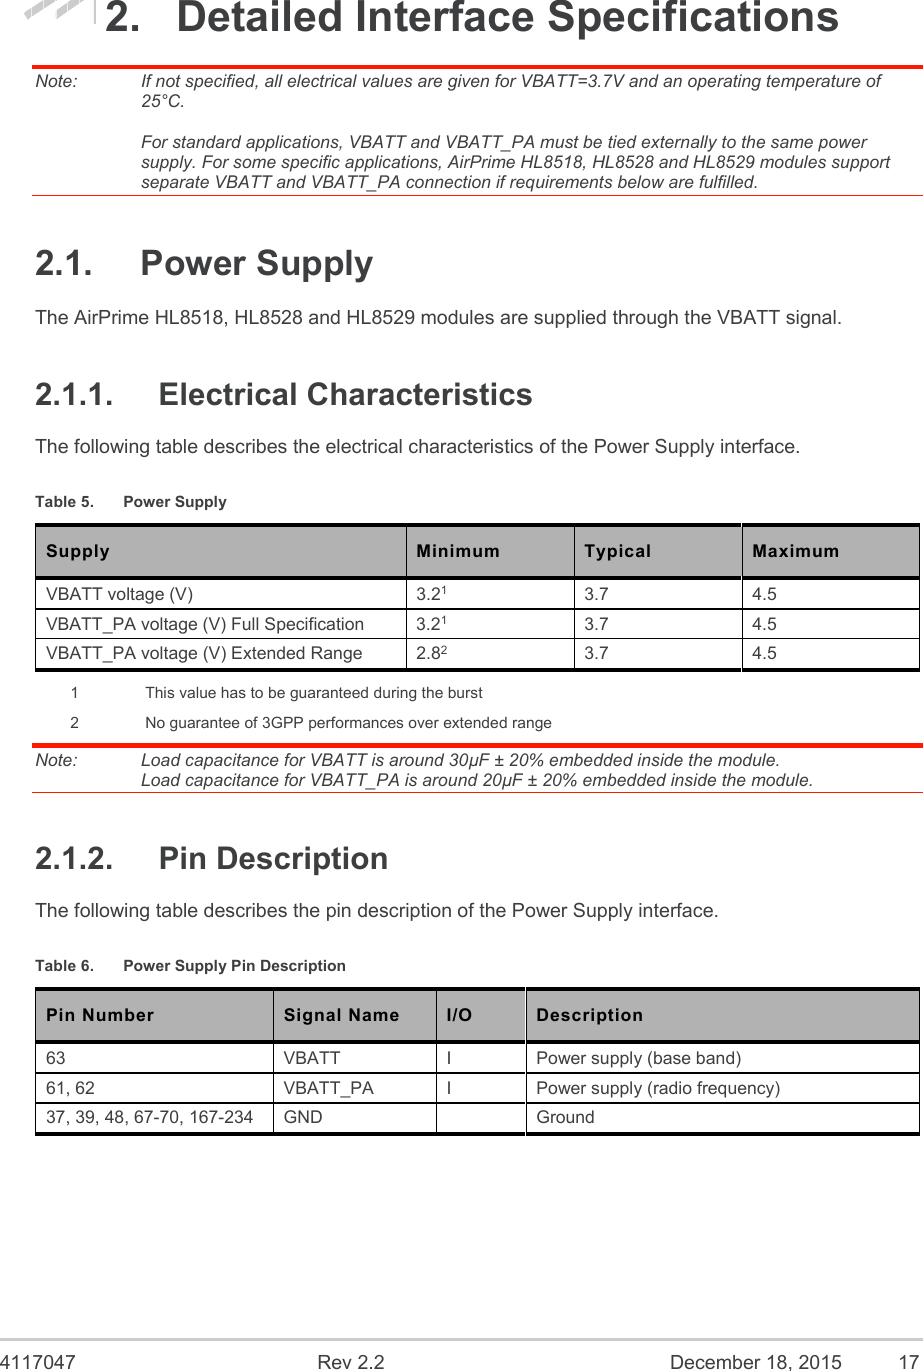  4117047  Rev 2.2  December 18, 2015  17 2.  Detailed Interface Specifications Note:   If not specified, all electrical values are given for VBATT=3.7V and an operating temperature of 25°C.  For standard applications, VBATT and VBATT_PA must be tied externally to the same power supply. For some specific applications, AirPrime HL8518, HL8528 and HL8529 modules support separate VBATT and VBATT_PA connection if requirements below are fulfilled. 2.1.  Power Supply The AirPrime HL8518, HL8528 and HL8529 modules are supplied through the VBATT signal. 2.1.1.  Electrical Characteristics The following table describes the electrical characteristics of the Power Supply interface. Table 5.  Power Supply Supply  Minimum  Typical  Maximum VBATT voltage (V)  3.21 3.7  4.5 VBATT_PA voltage (V) Full Specification  3.21 3.7  4.5 VBATT_PA voltage (V) Extended Range  2.82 3.7  4.5 1  This value has to be guaranteed during the burst 2  No guarantee of 3GPP performances over extended range Note:   Load capacitance for VBATT is around 30µF ± 20% embedded inside the module. Load capacitance for VBATT_PA is around 20µF ± 20% embedded inside the module. 2.1.2.  Pin Description The following table describes the pin description of the Power Supply interface. Table 6.  Power Supply Pin Description Pin Number Signal Name I/O Description 63  VBATT  I  Power supply (base band) 61, 62  VBATT_PA   I  Power supply (radio frequency) 37, 39, 48, 67-70, 167-234  GND    Ground 